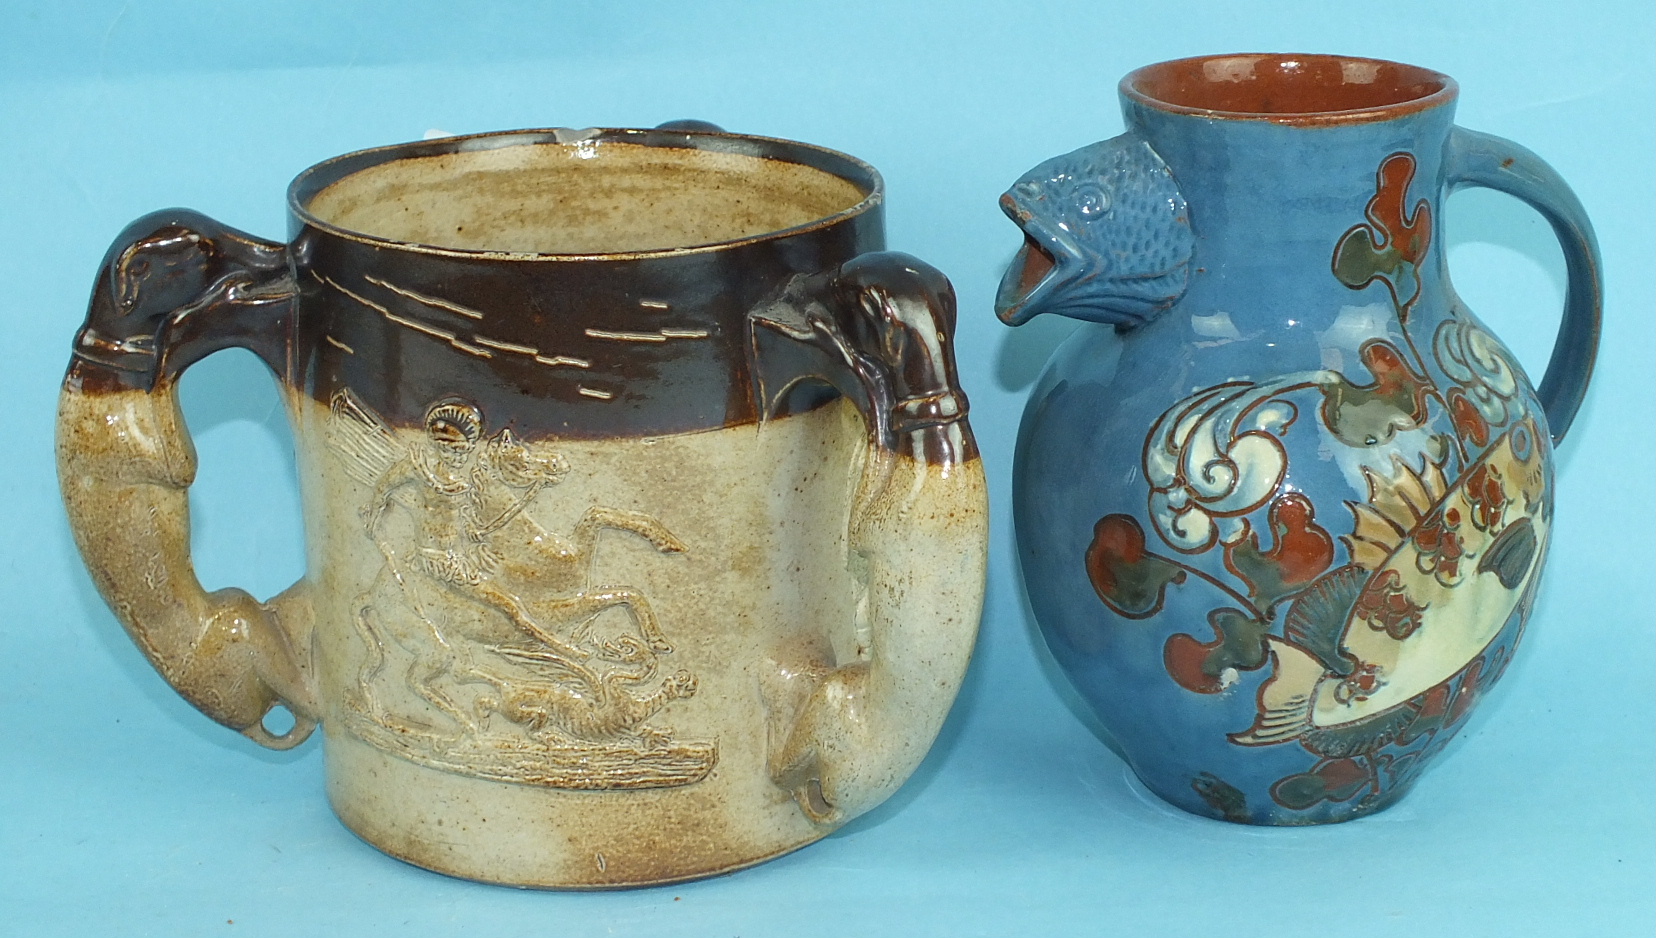 A Brannam Pottery slip-decorated fish jug and a 19th century stoneware tyg with St George & Dragon